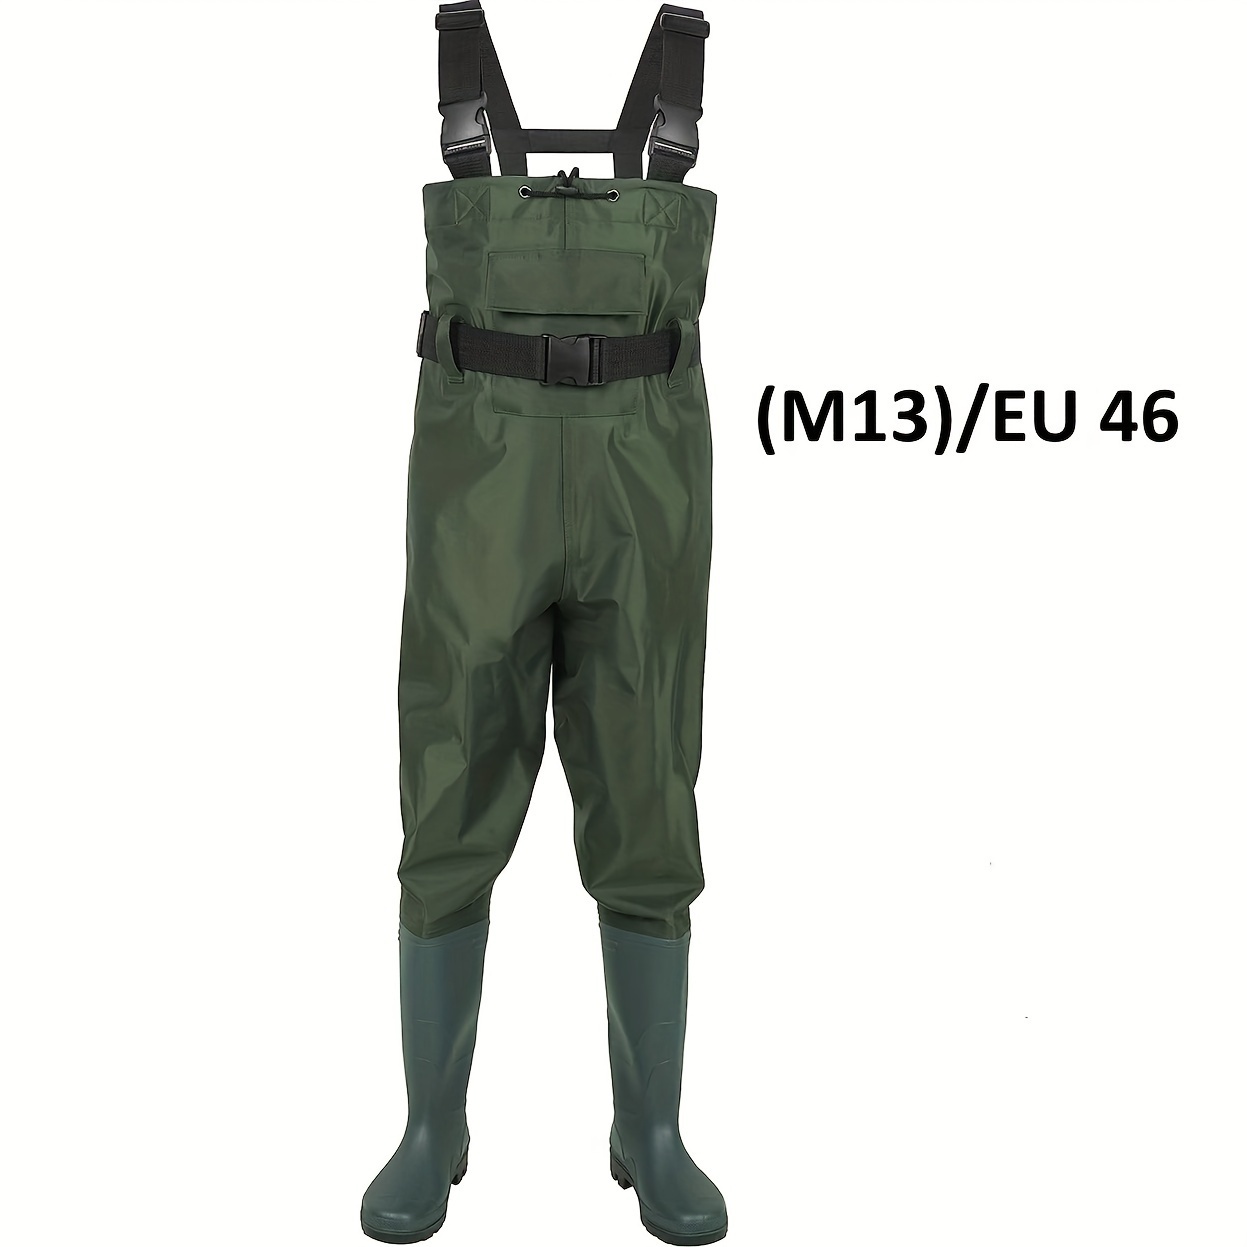 RUNCL Chest Waders with Boots, Fishing Waders, Waist-High Waders